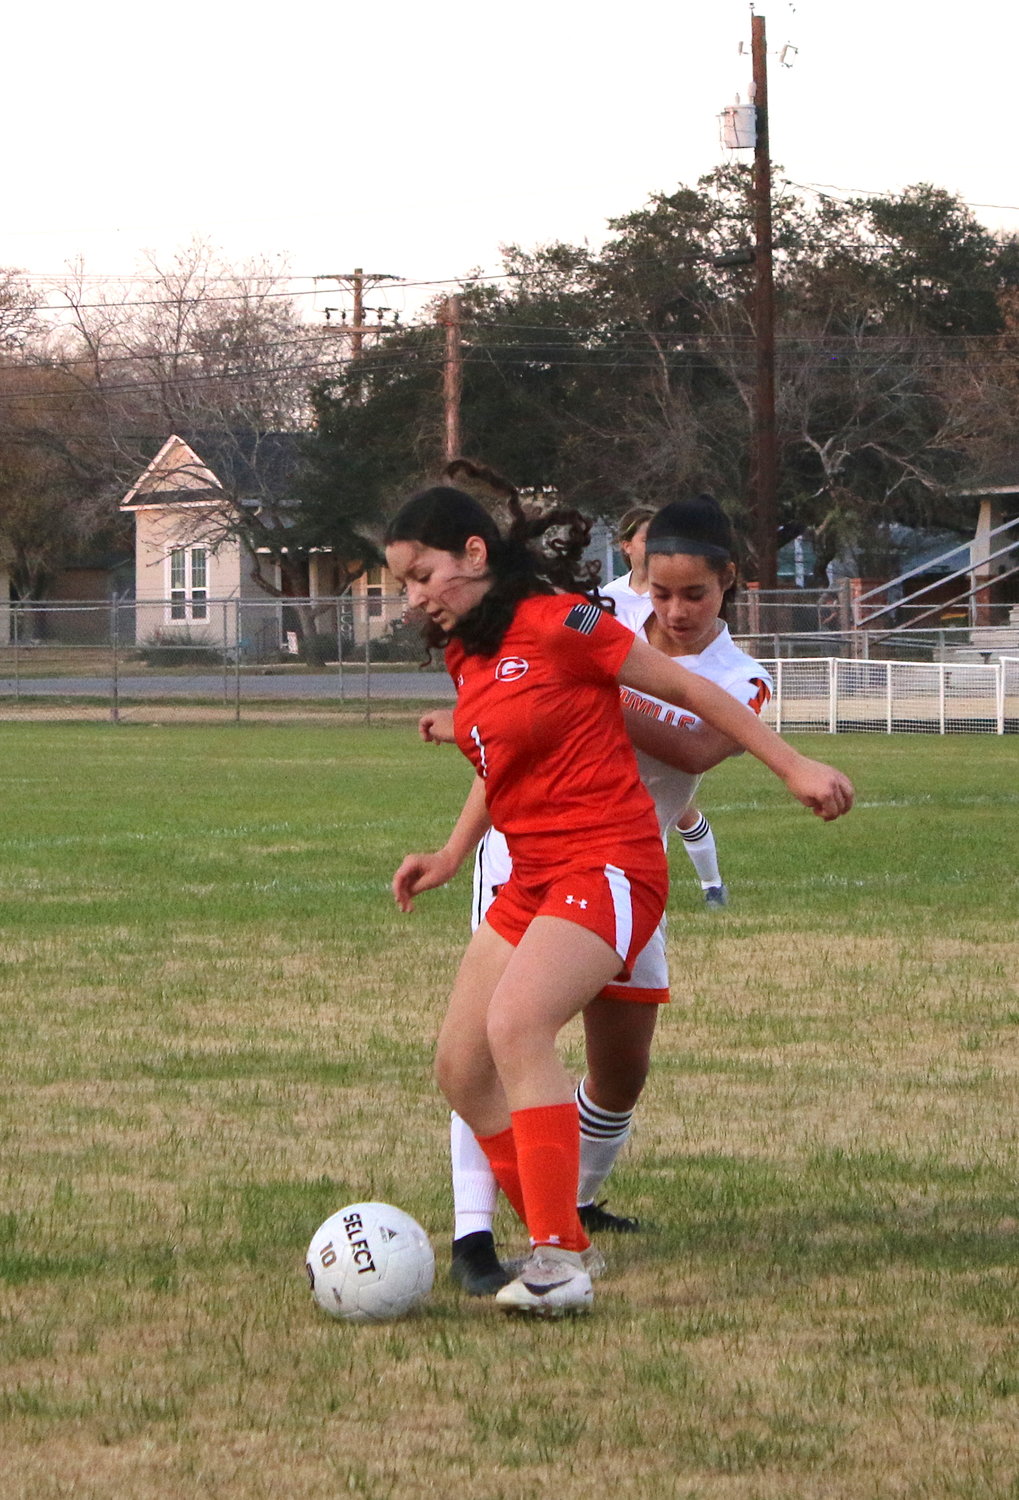 Gonzales Lady Apache Belen Leon (1) jostles for position during an earlier match this season. The Lady Apaches qualified for a playoff spot but details about that matchup were not available as of presstime.